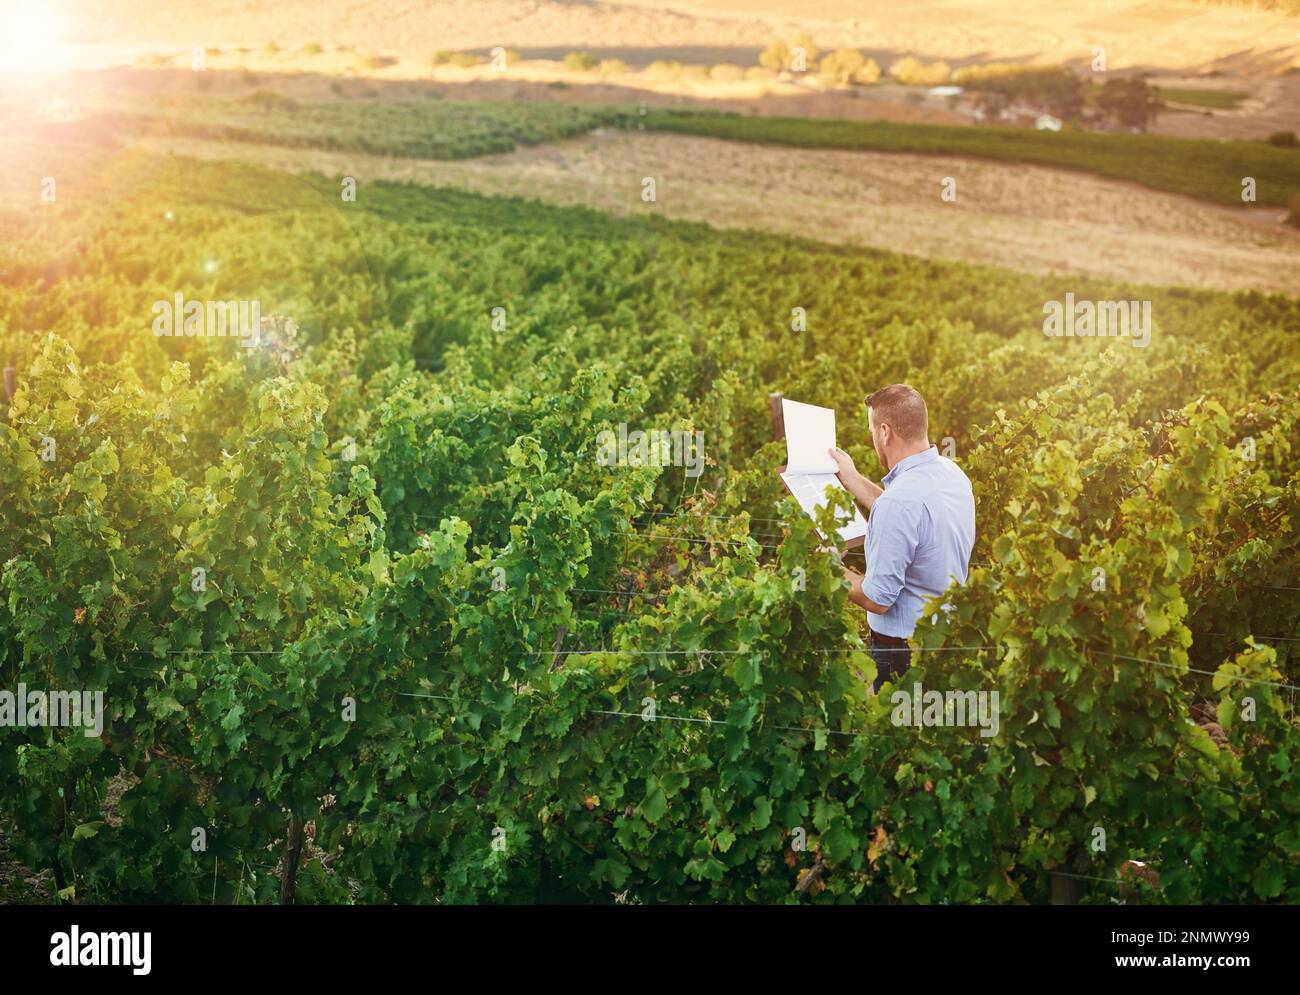 Keeping track of his grape vines progress. a farmer out on his rounds in his vineyard. Stock Photo